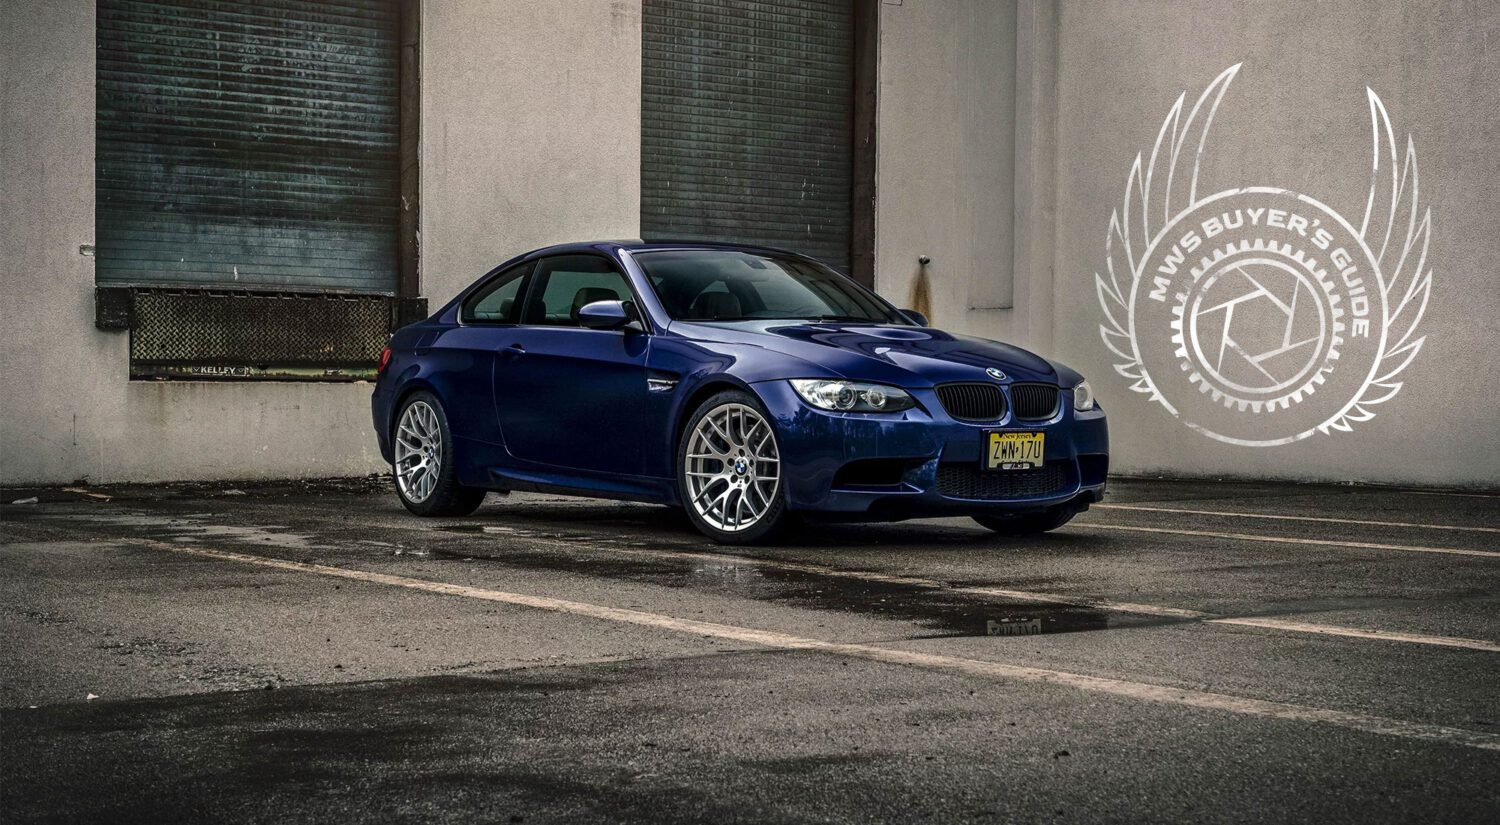 The BMW E92 M3 Buyer’s Guide